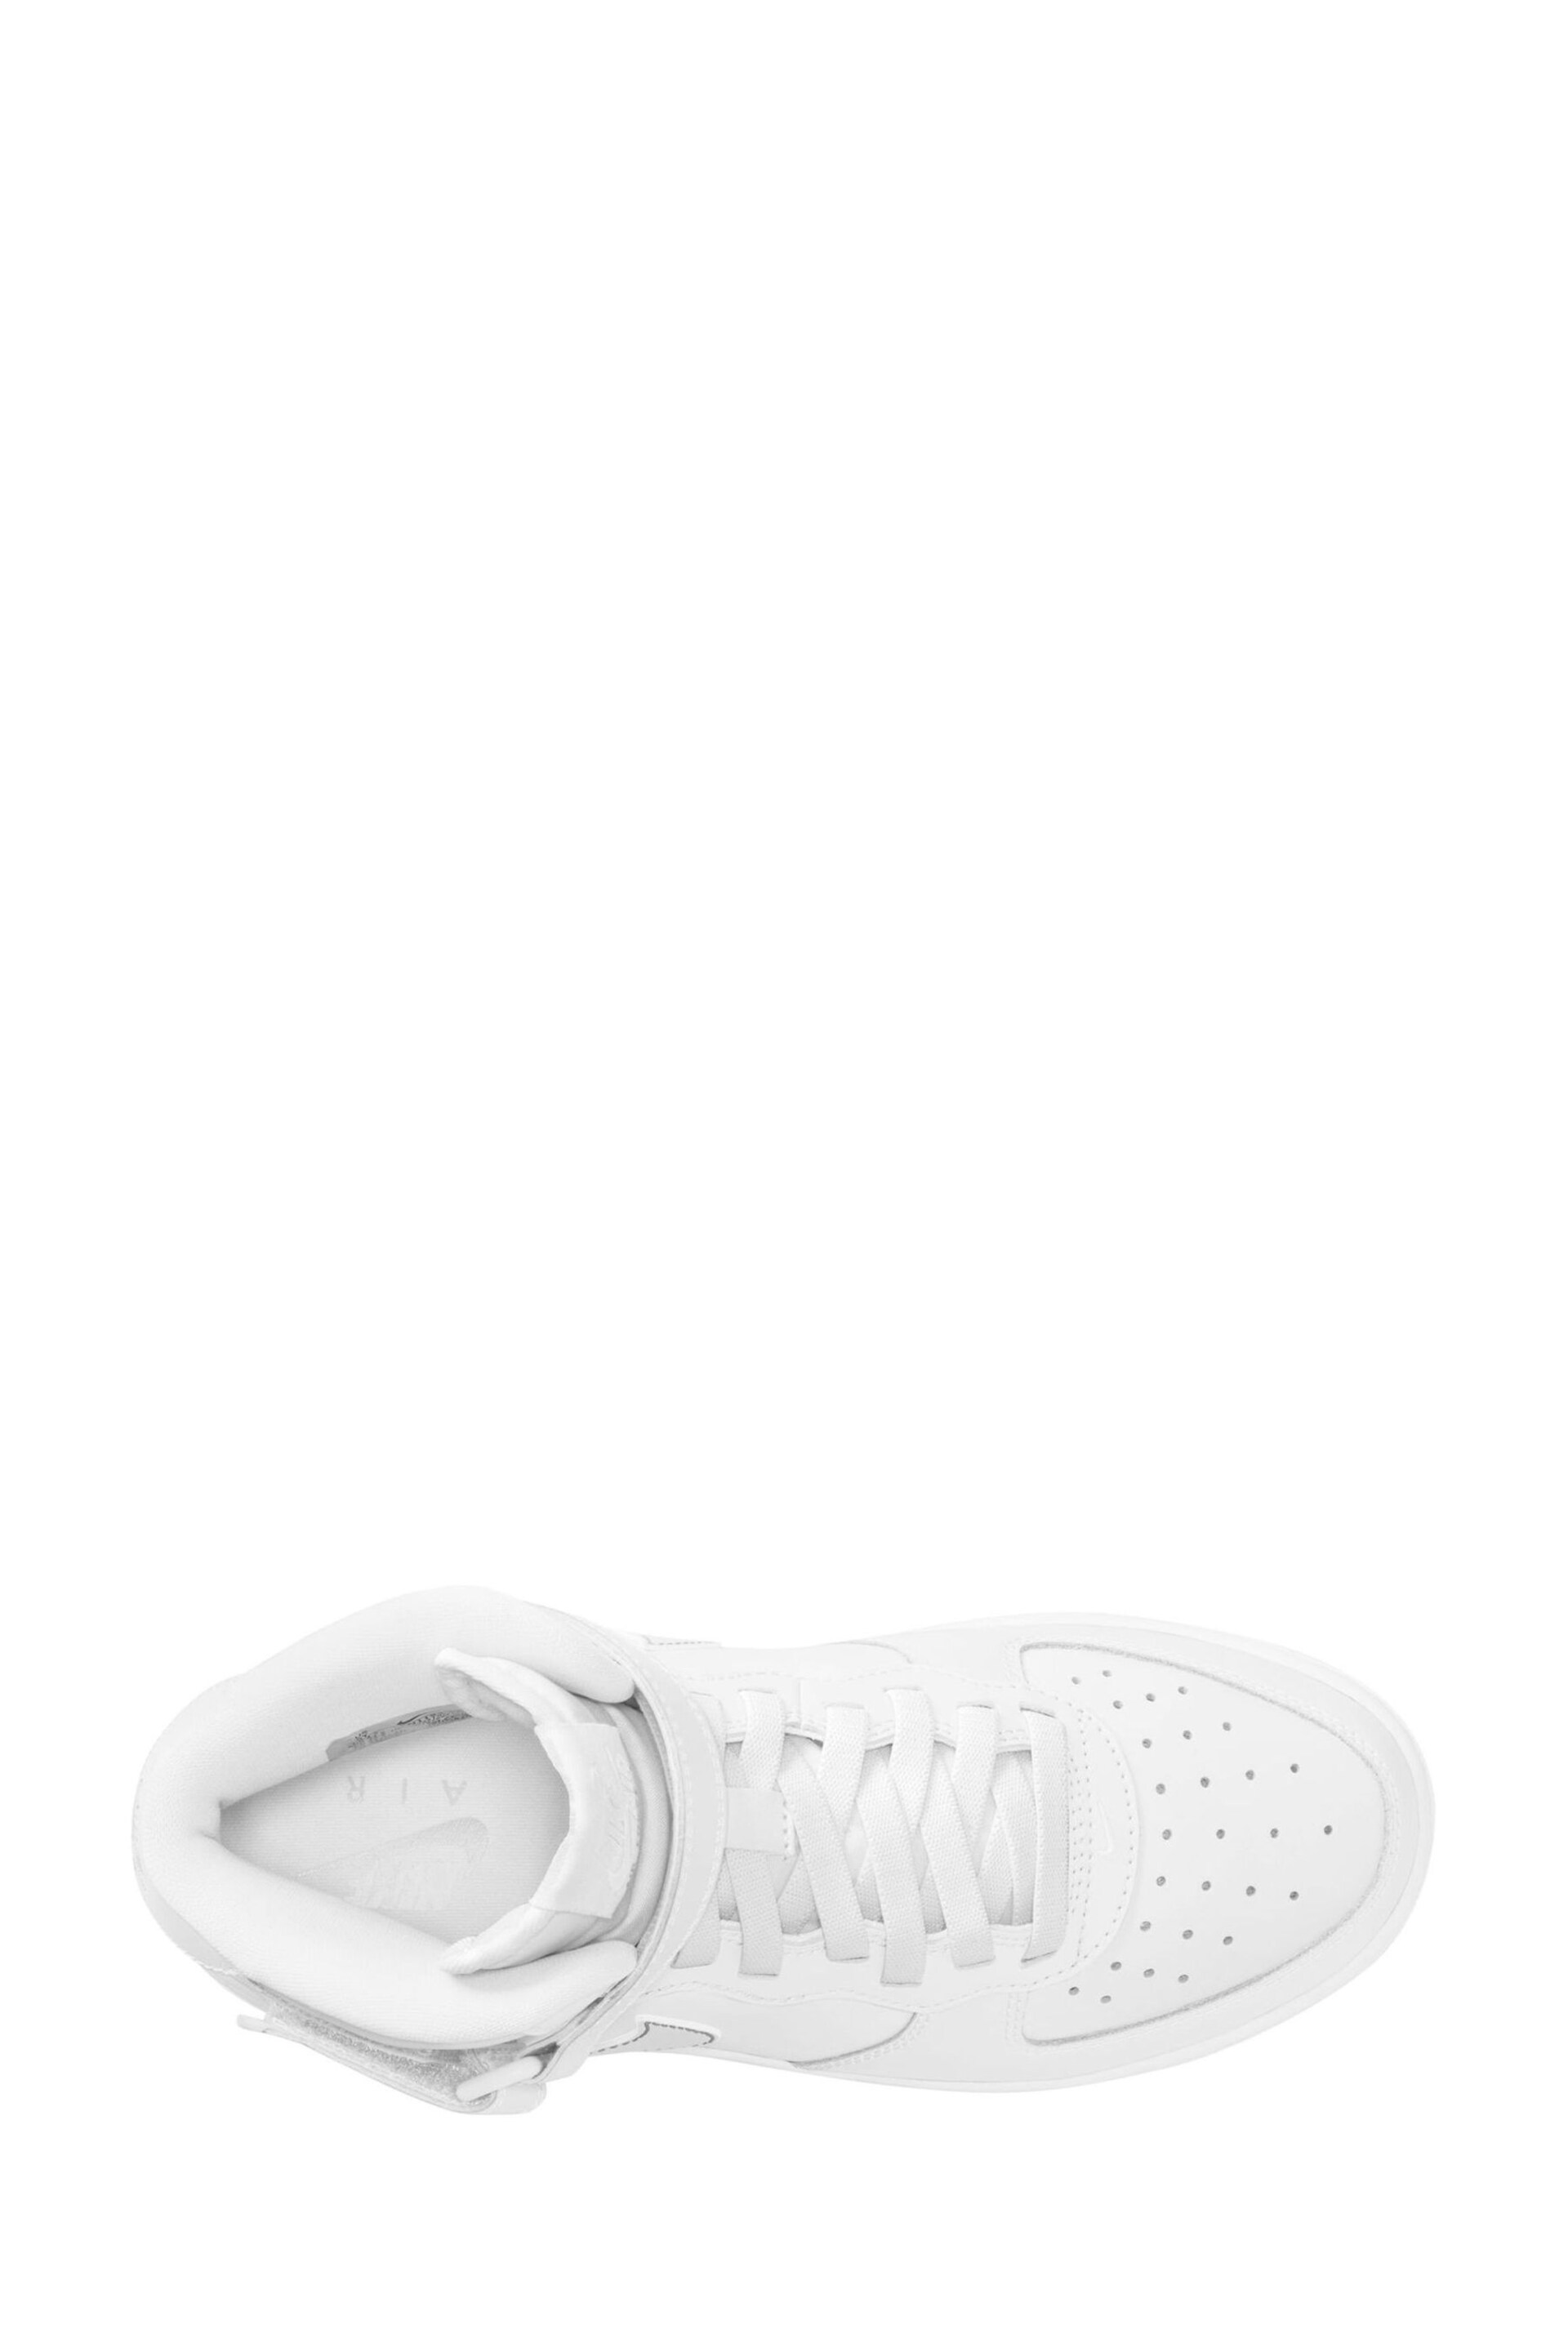 Nike White Youth Air Force 1 Mid EasyOn Trainers - Image 8 of 13